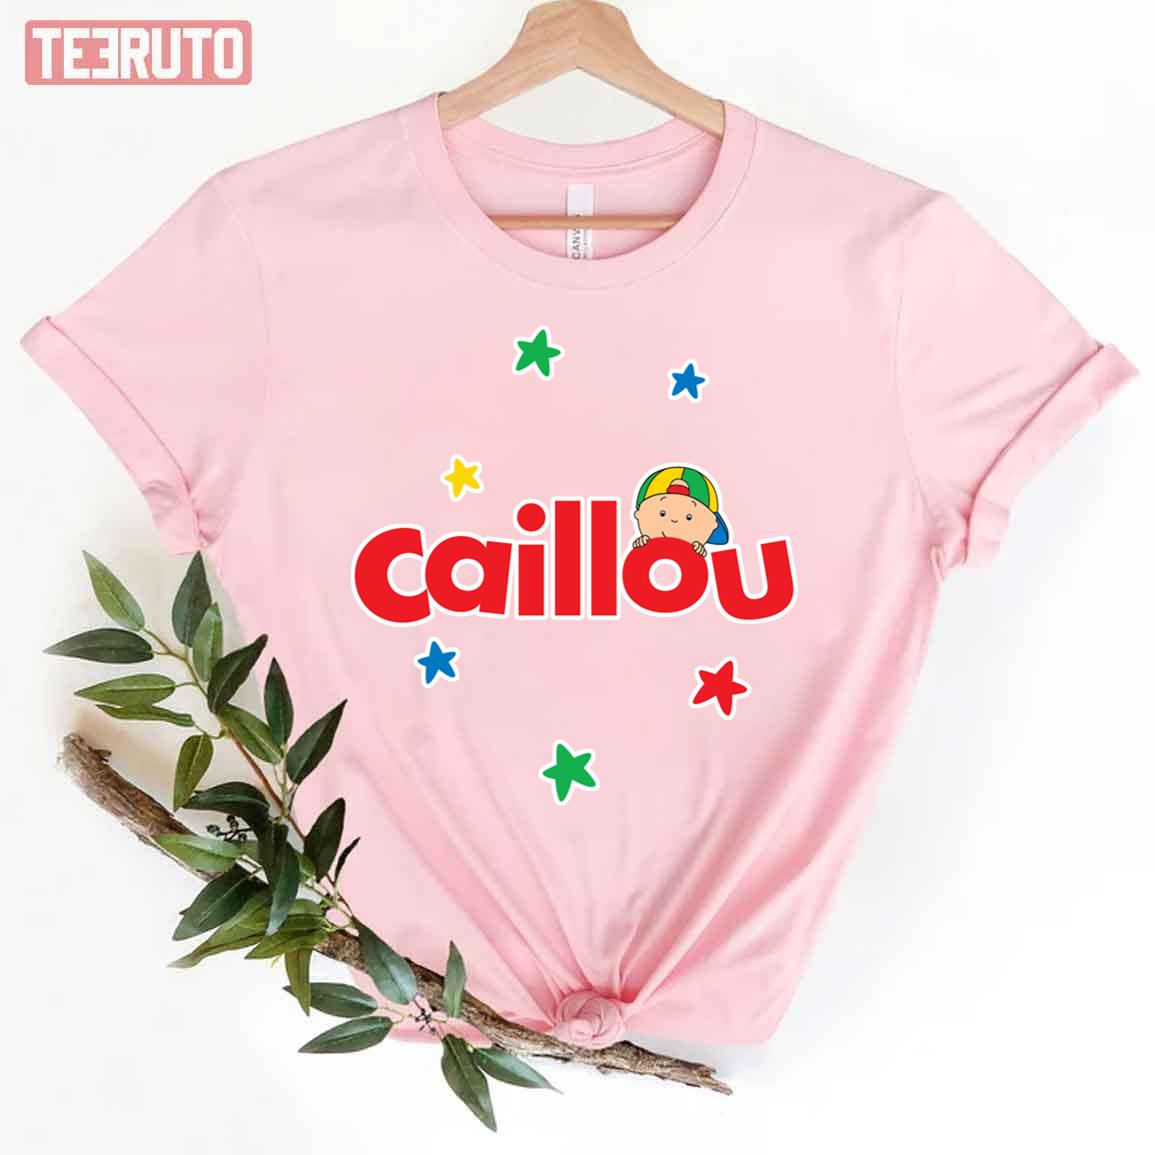 Red Typographic Design Caillou Unisex T-Shirt